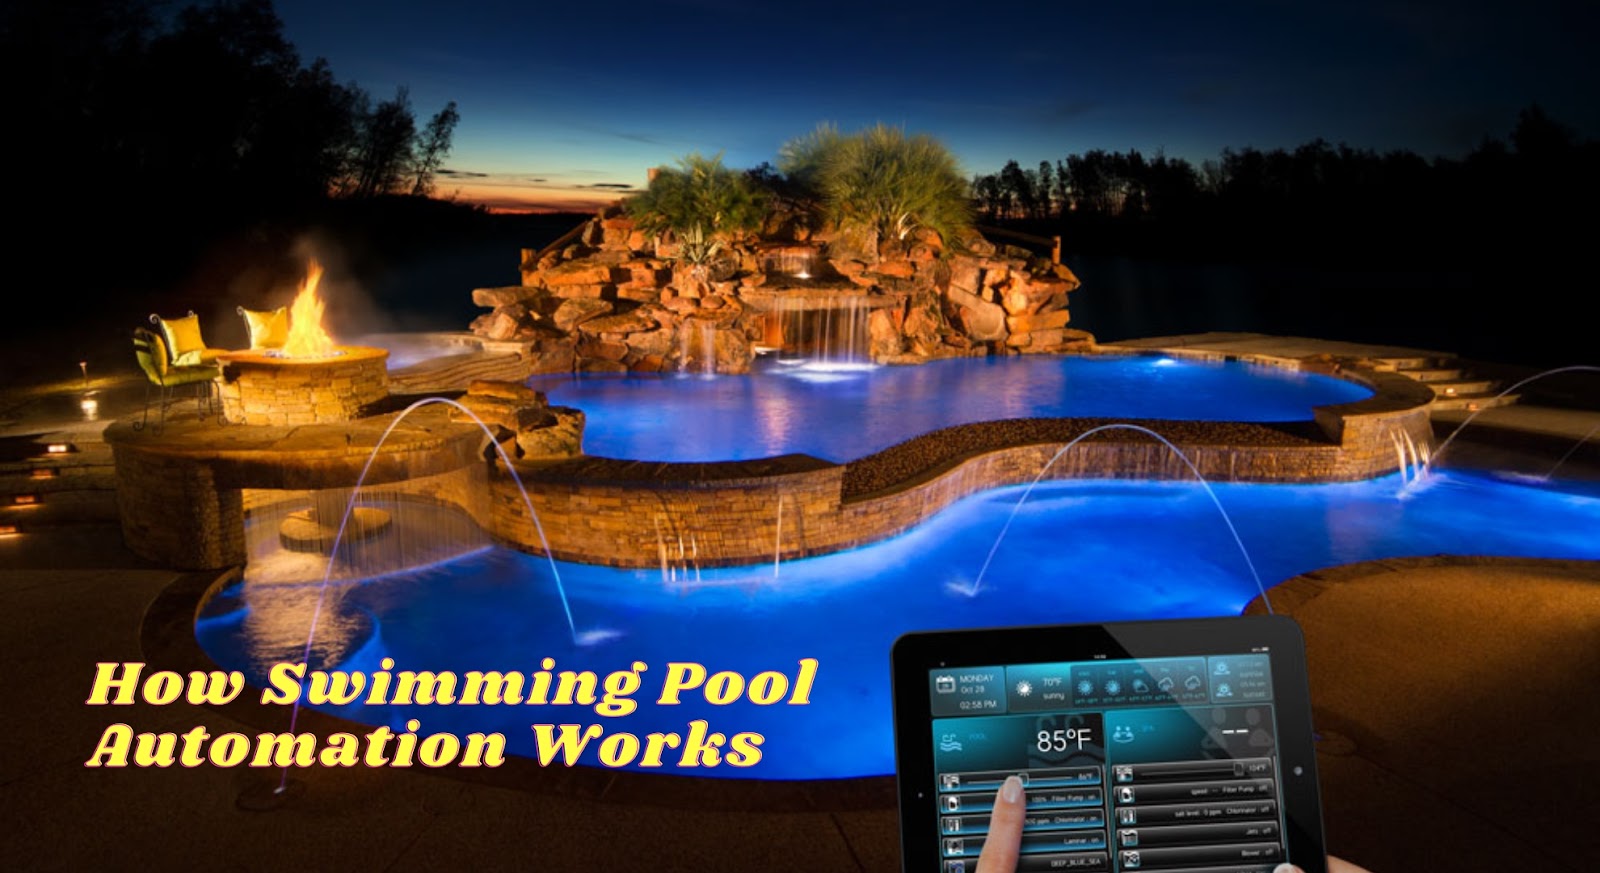 How Swimming Pool Automation Works